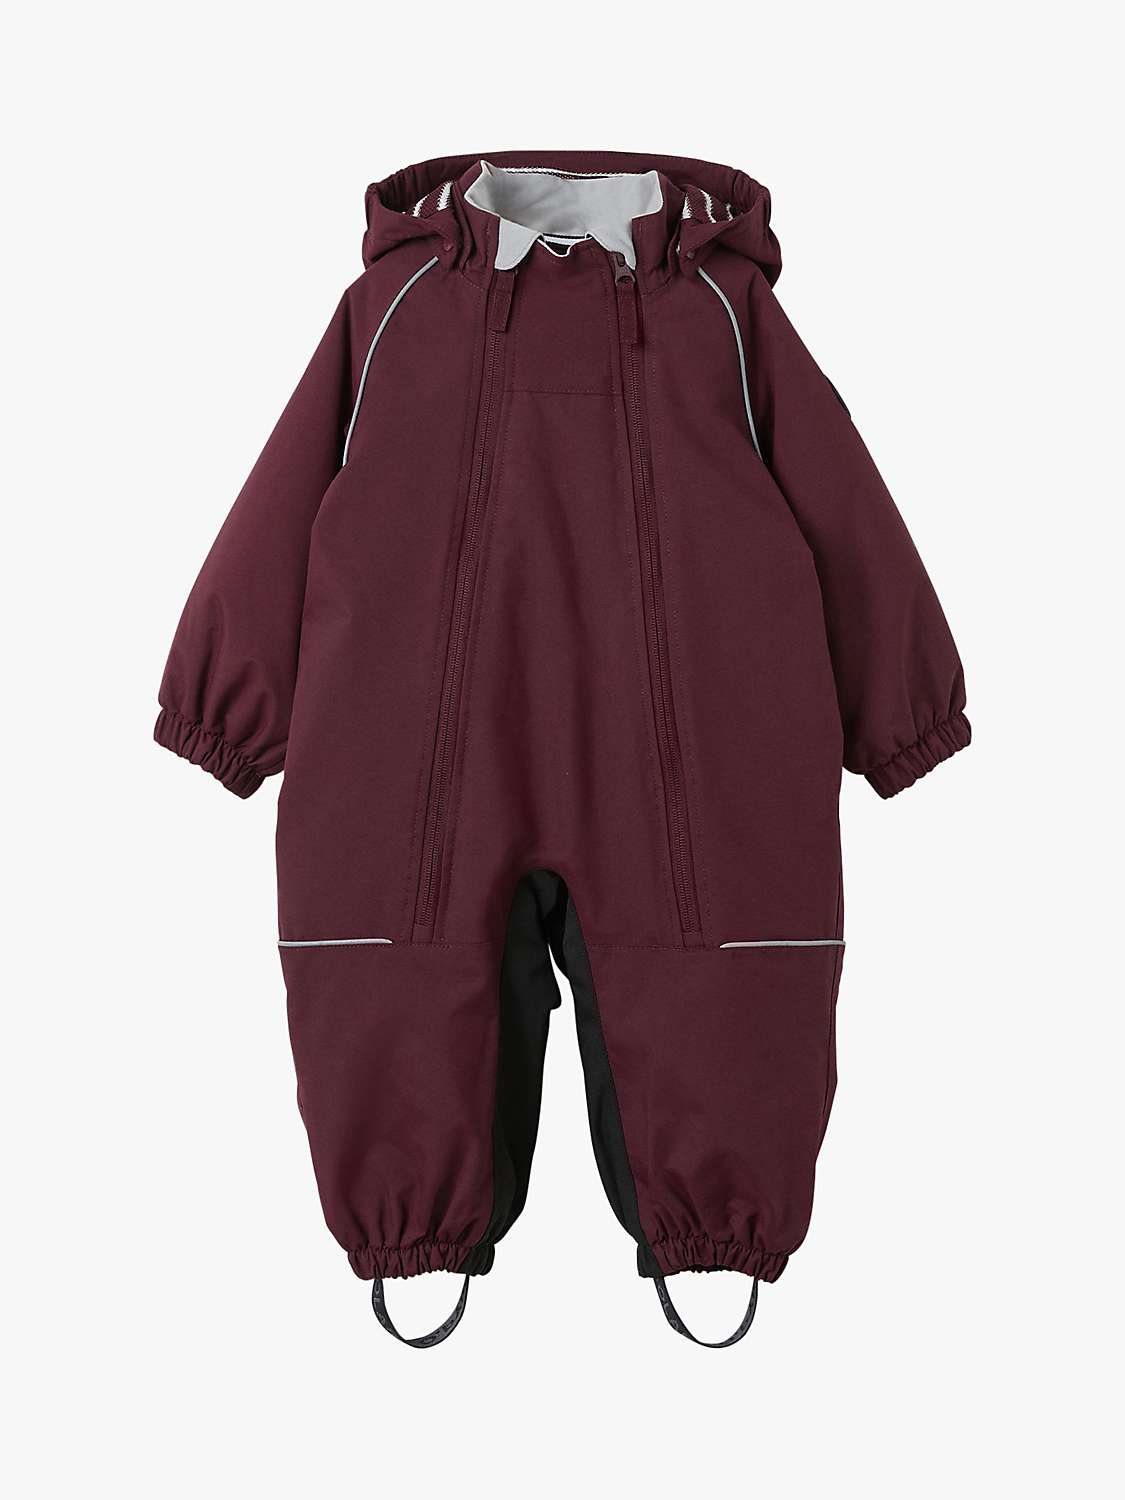 Buy Polarn O. Pyret Baby Shell Waterproof Overall Online at johnlewis.com